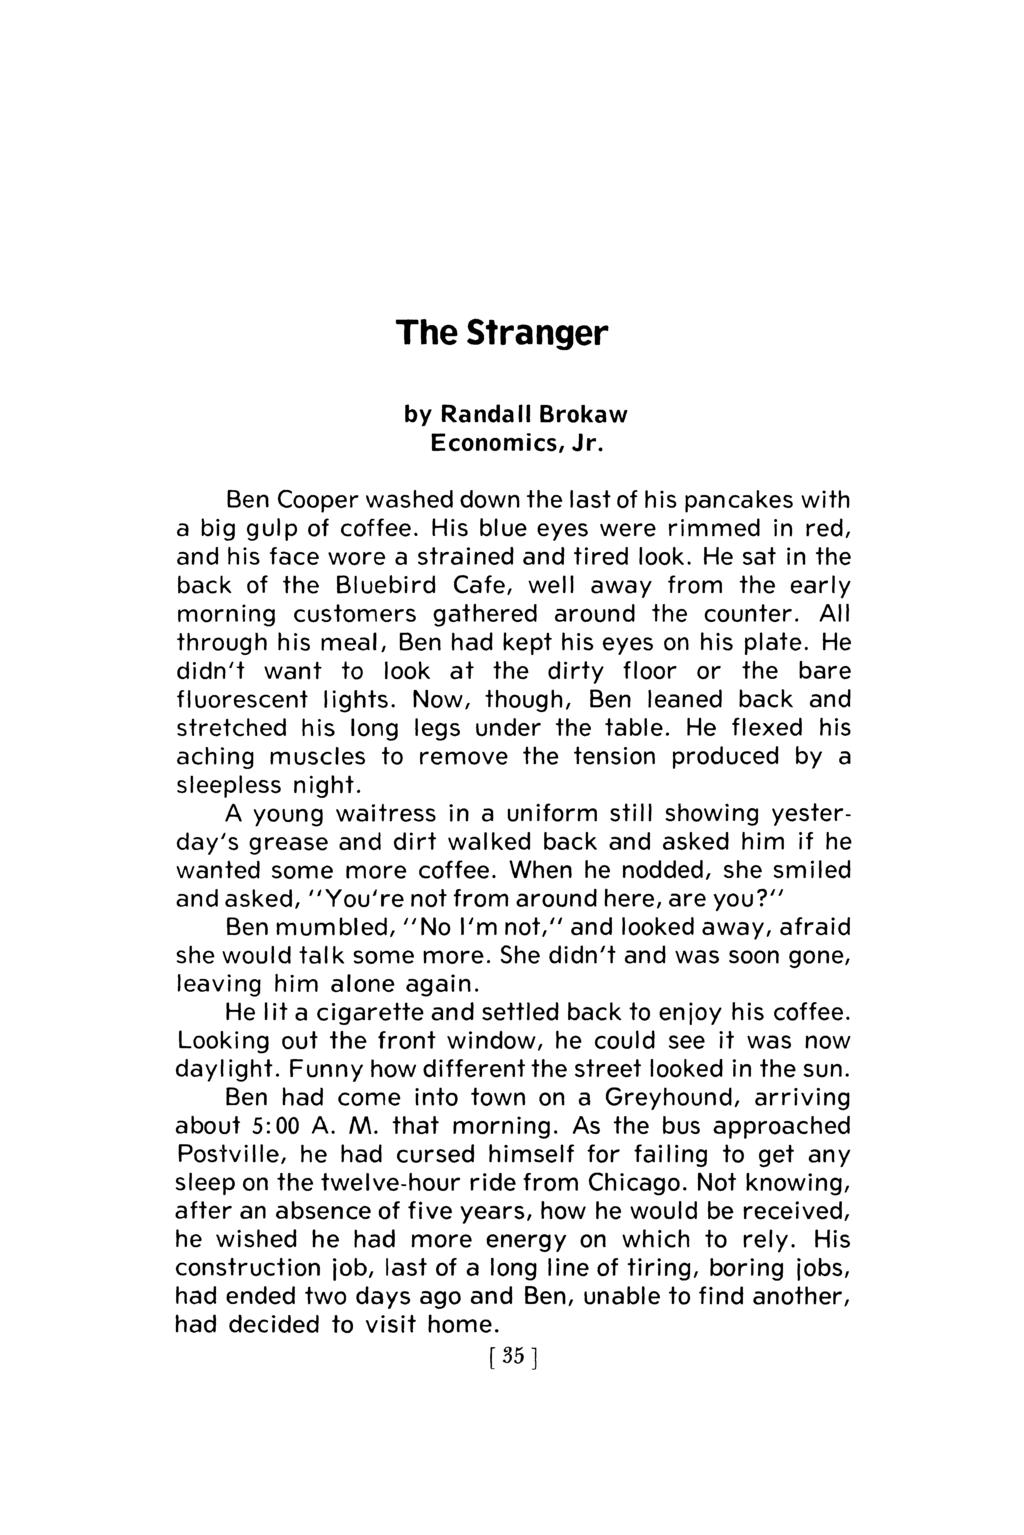 The Stranger by Randall Brokaw Economics/Jr. Ben Cooper washed down the last of his pancakes with a big gulp of coffee. His blue eyes were rimmed in red, and his face wore a strained and tired look.